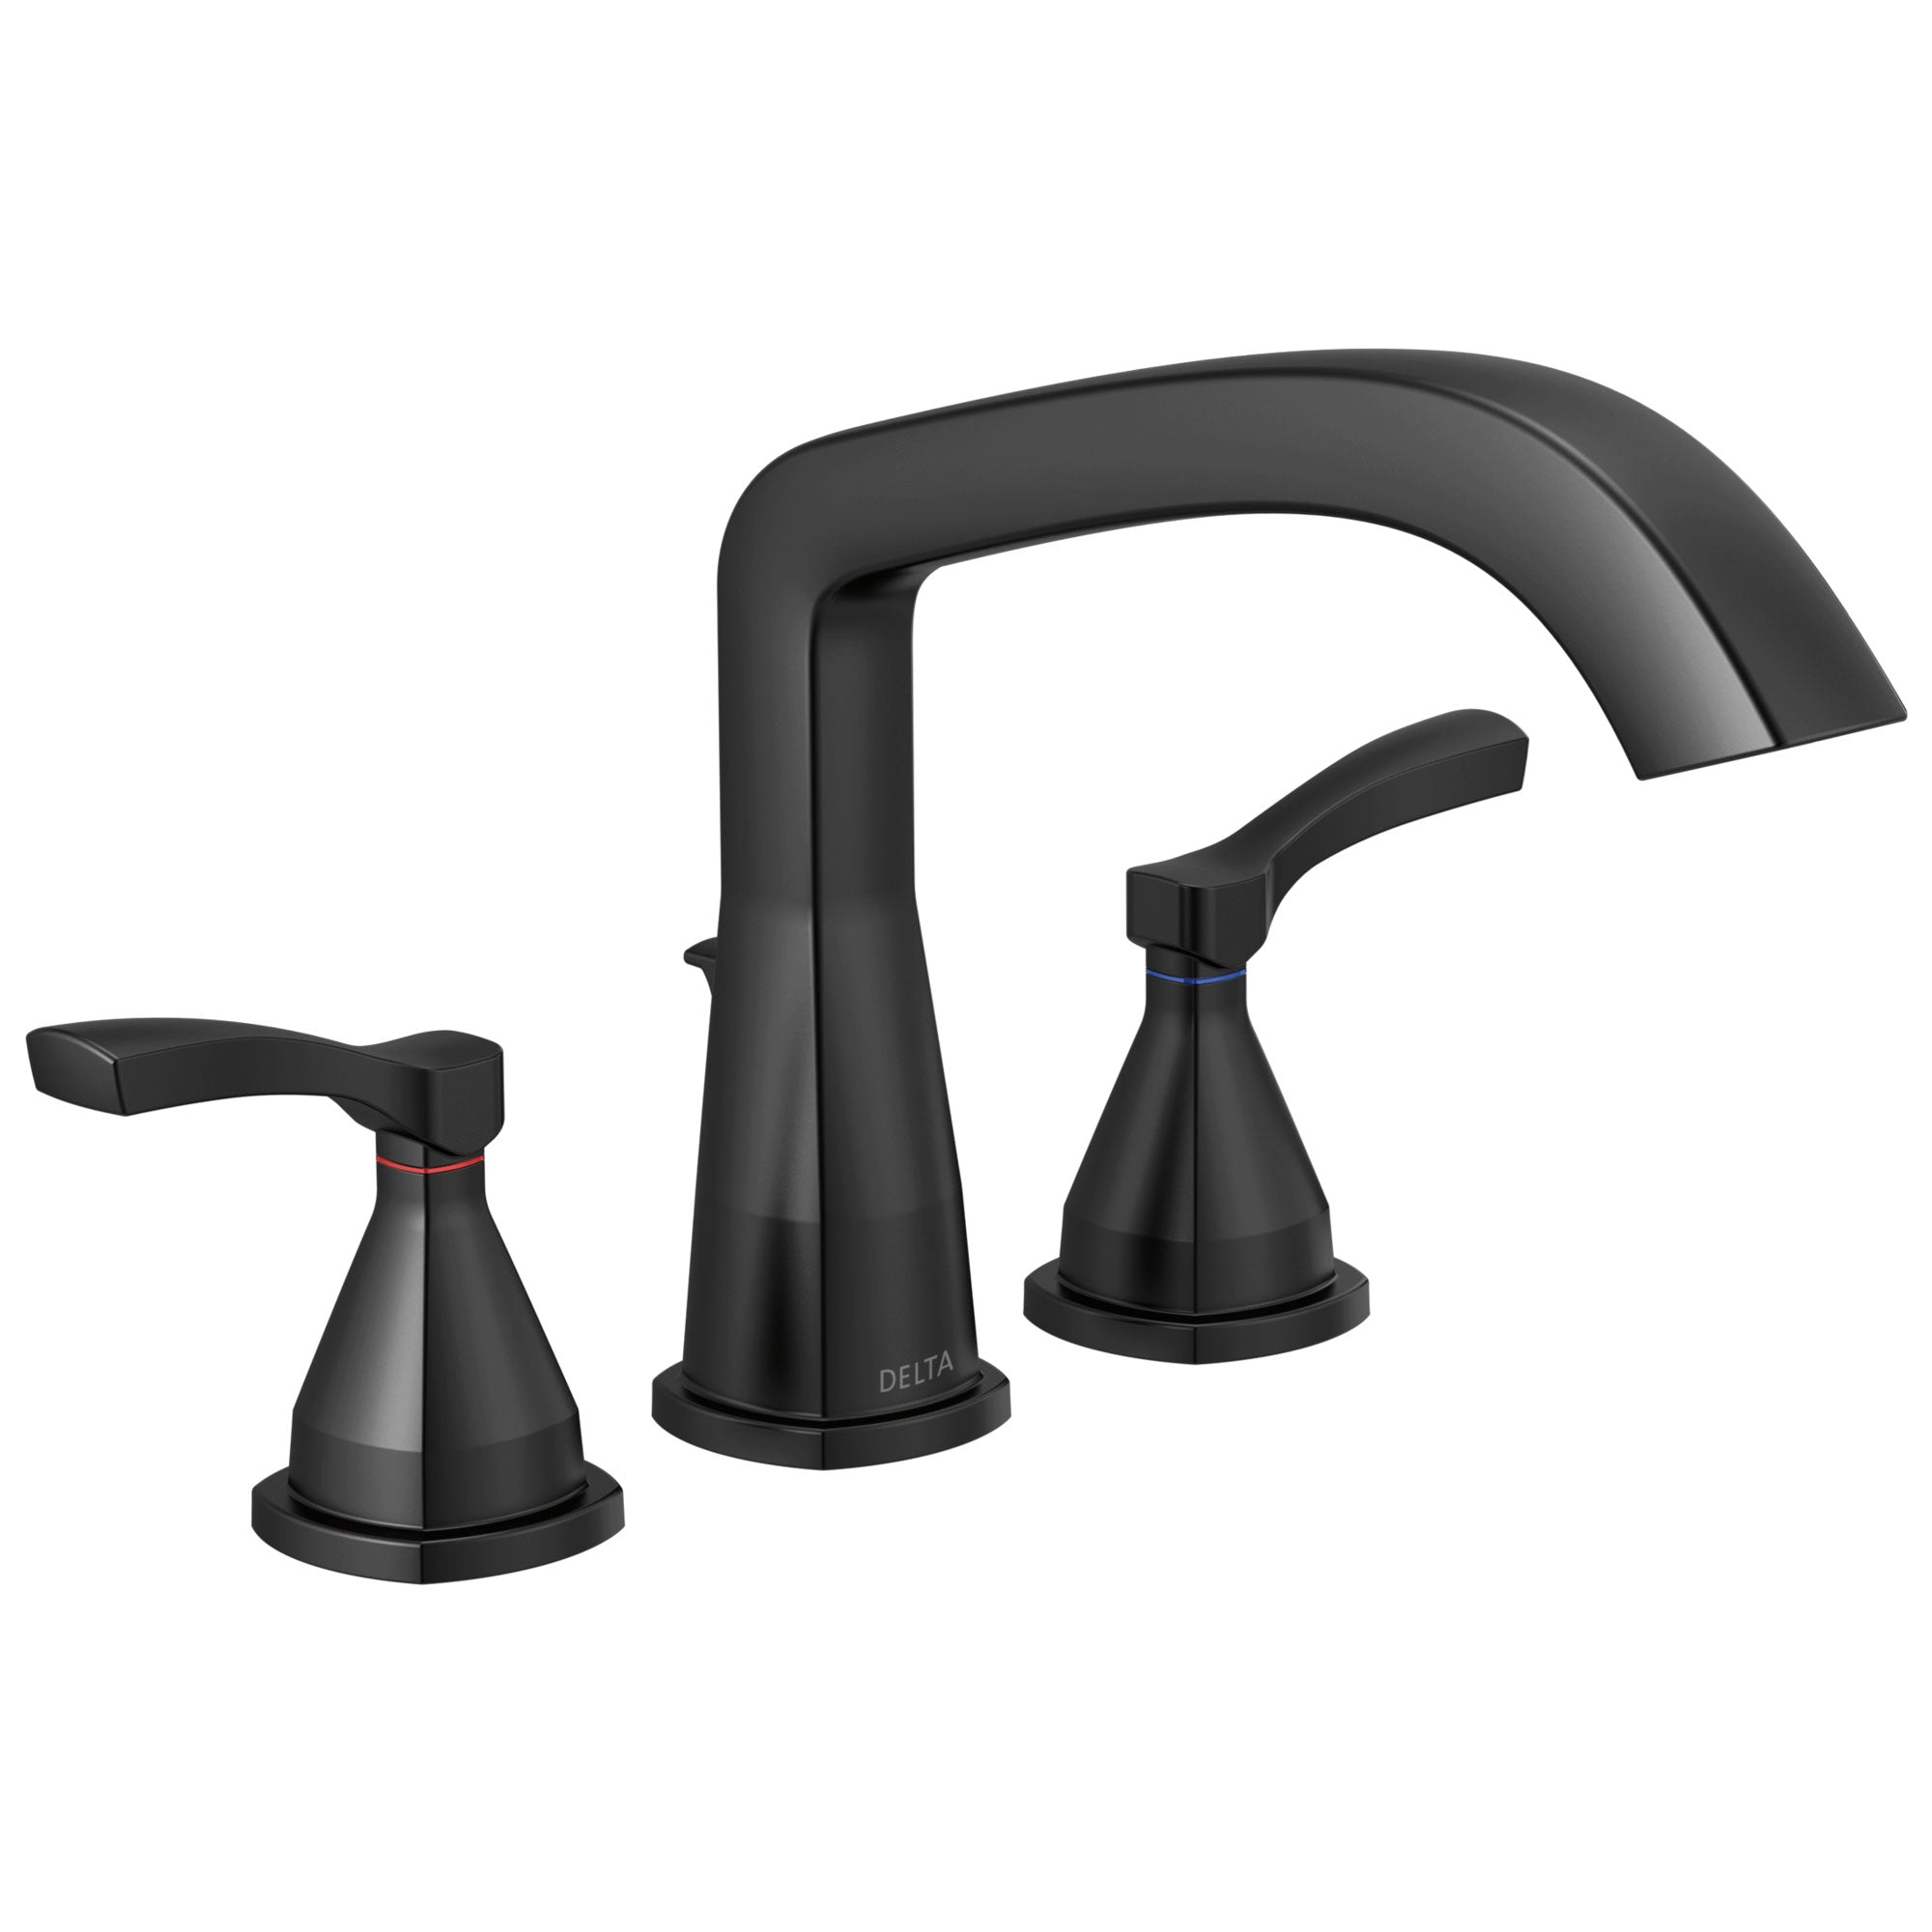 Delta Stryke Collection Matte Black Finish Three Hole Roman Tub Filler Faucet Includes Rough-in Valve and Lever Handles D3157V